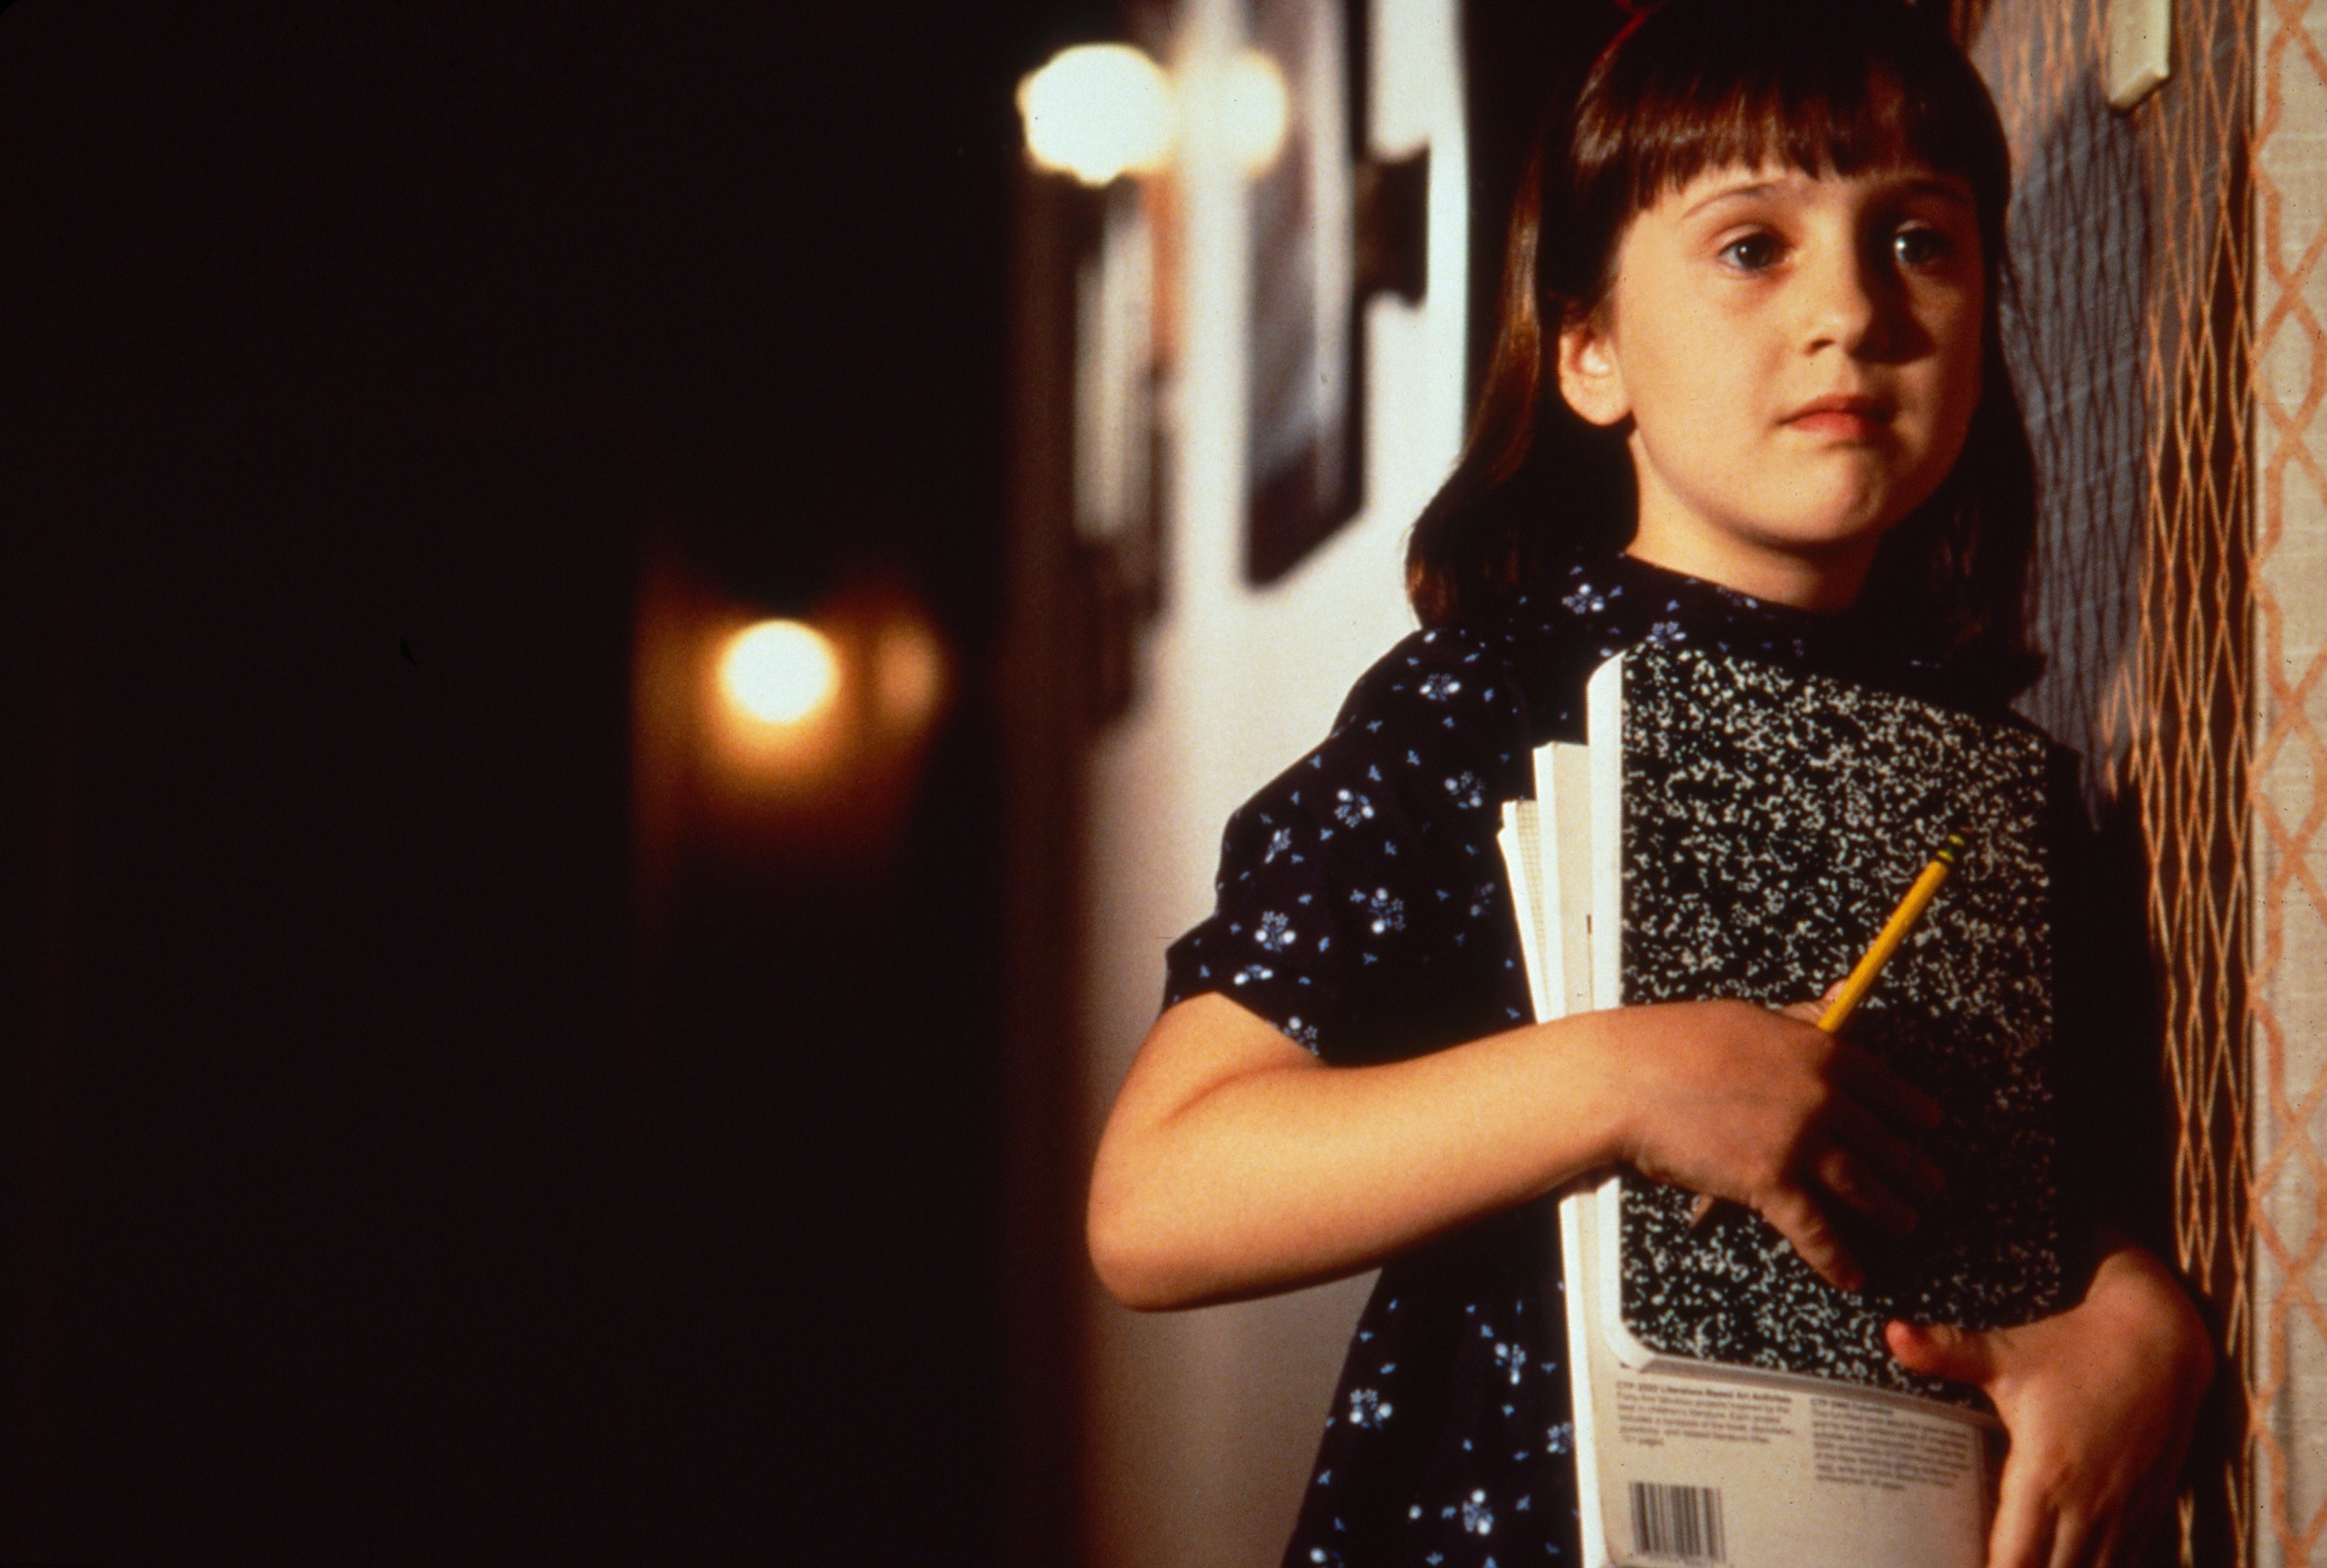 Matilda carries her notebook down the hall